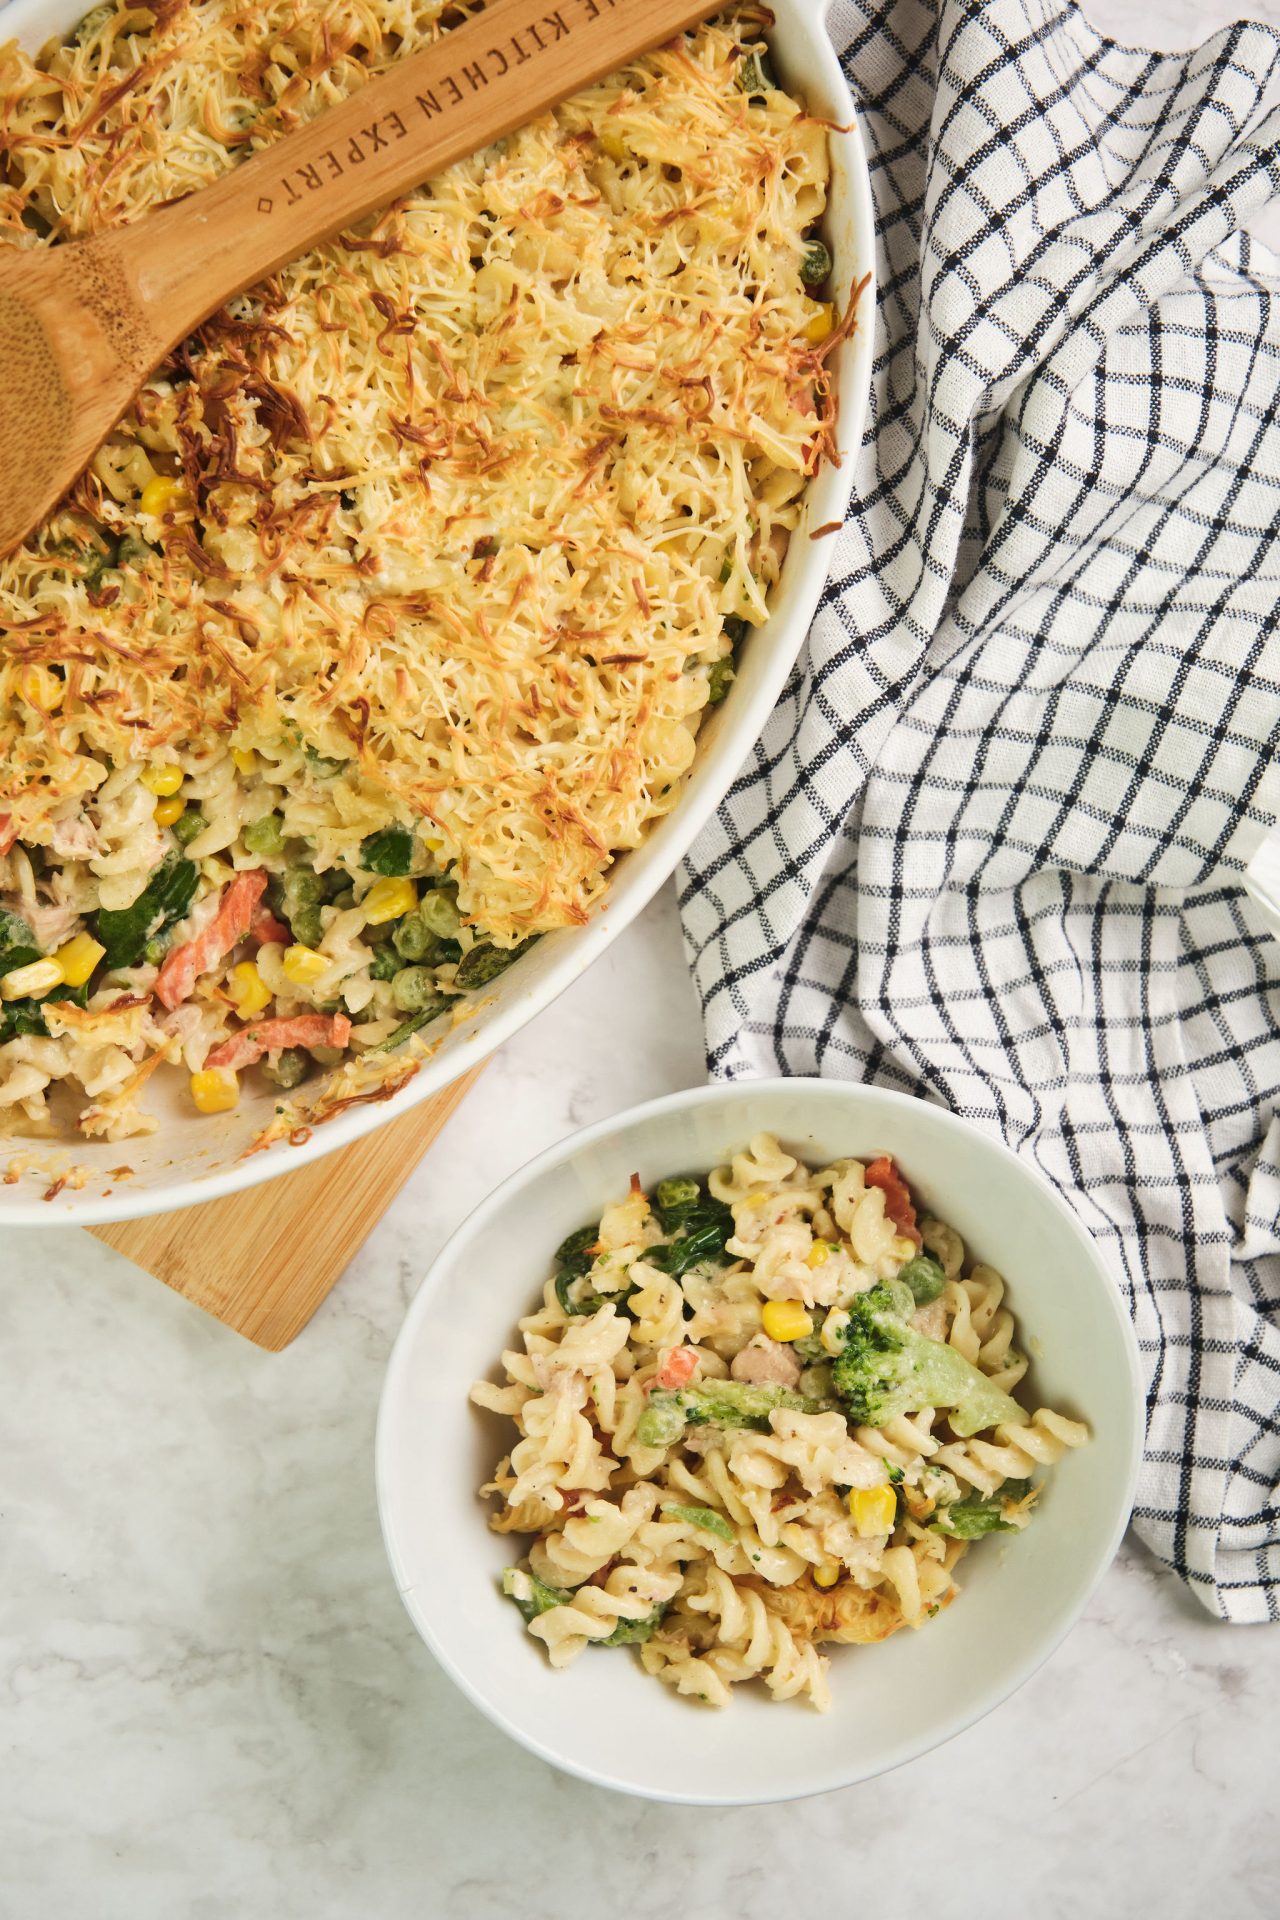 Tuna pasta casserole with vegetables in a large baking dish with a smaller serving in a bowl